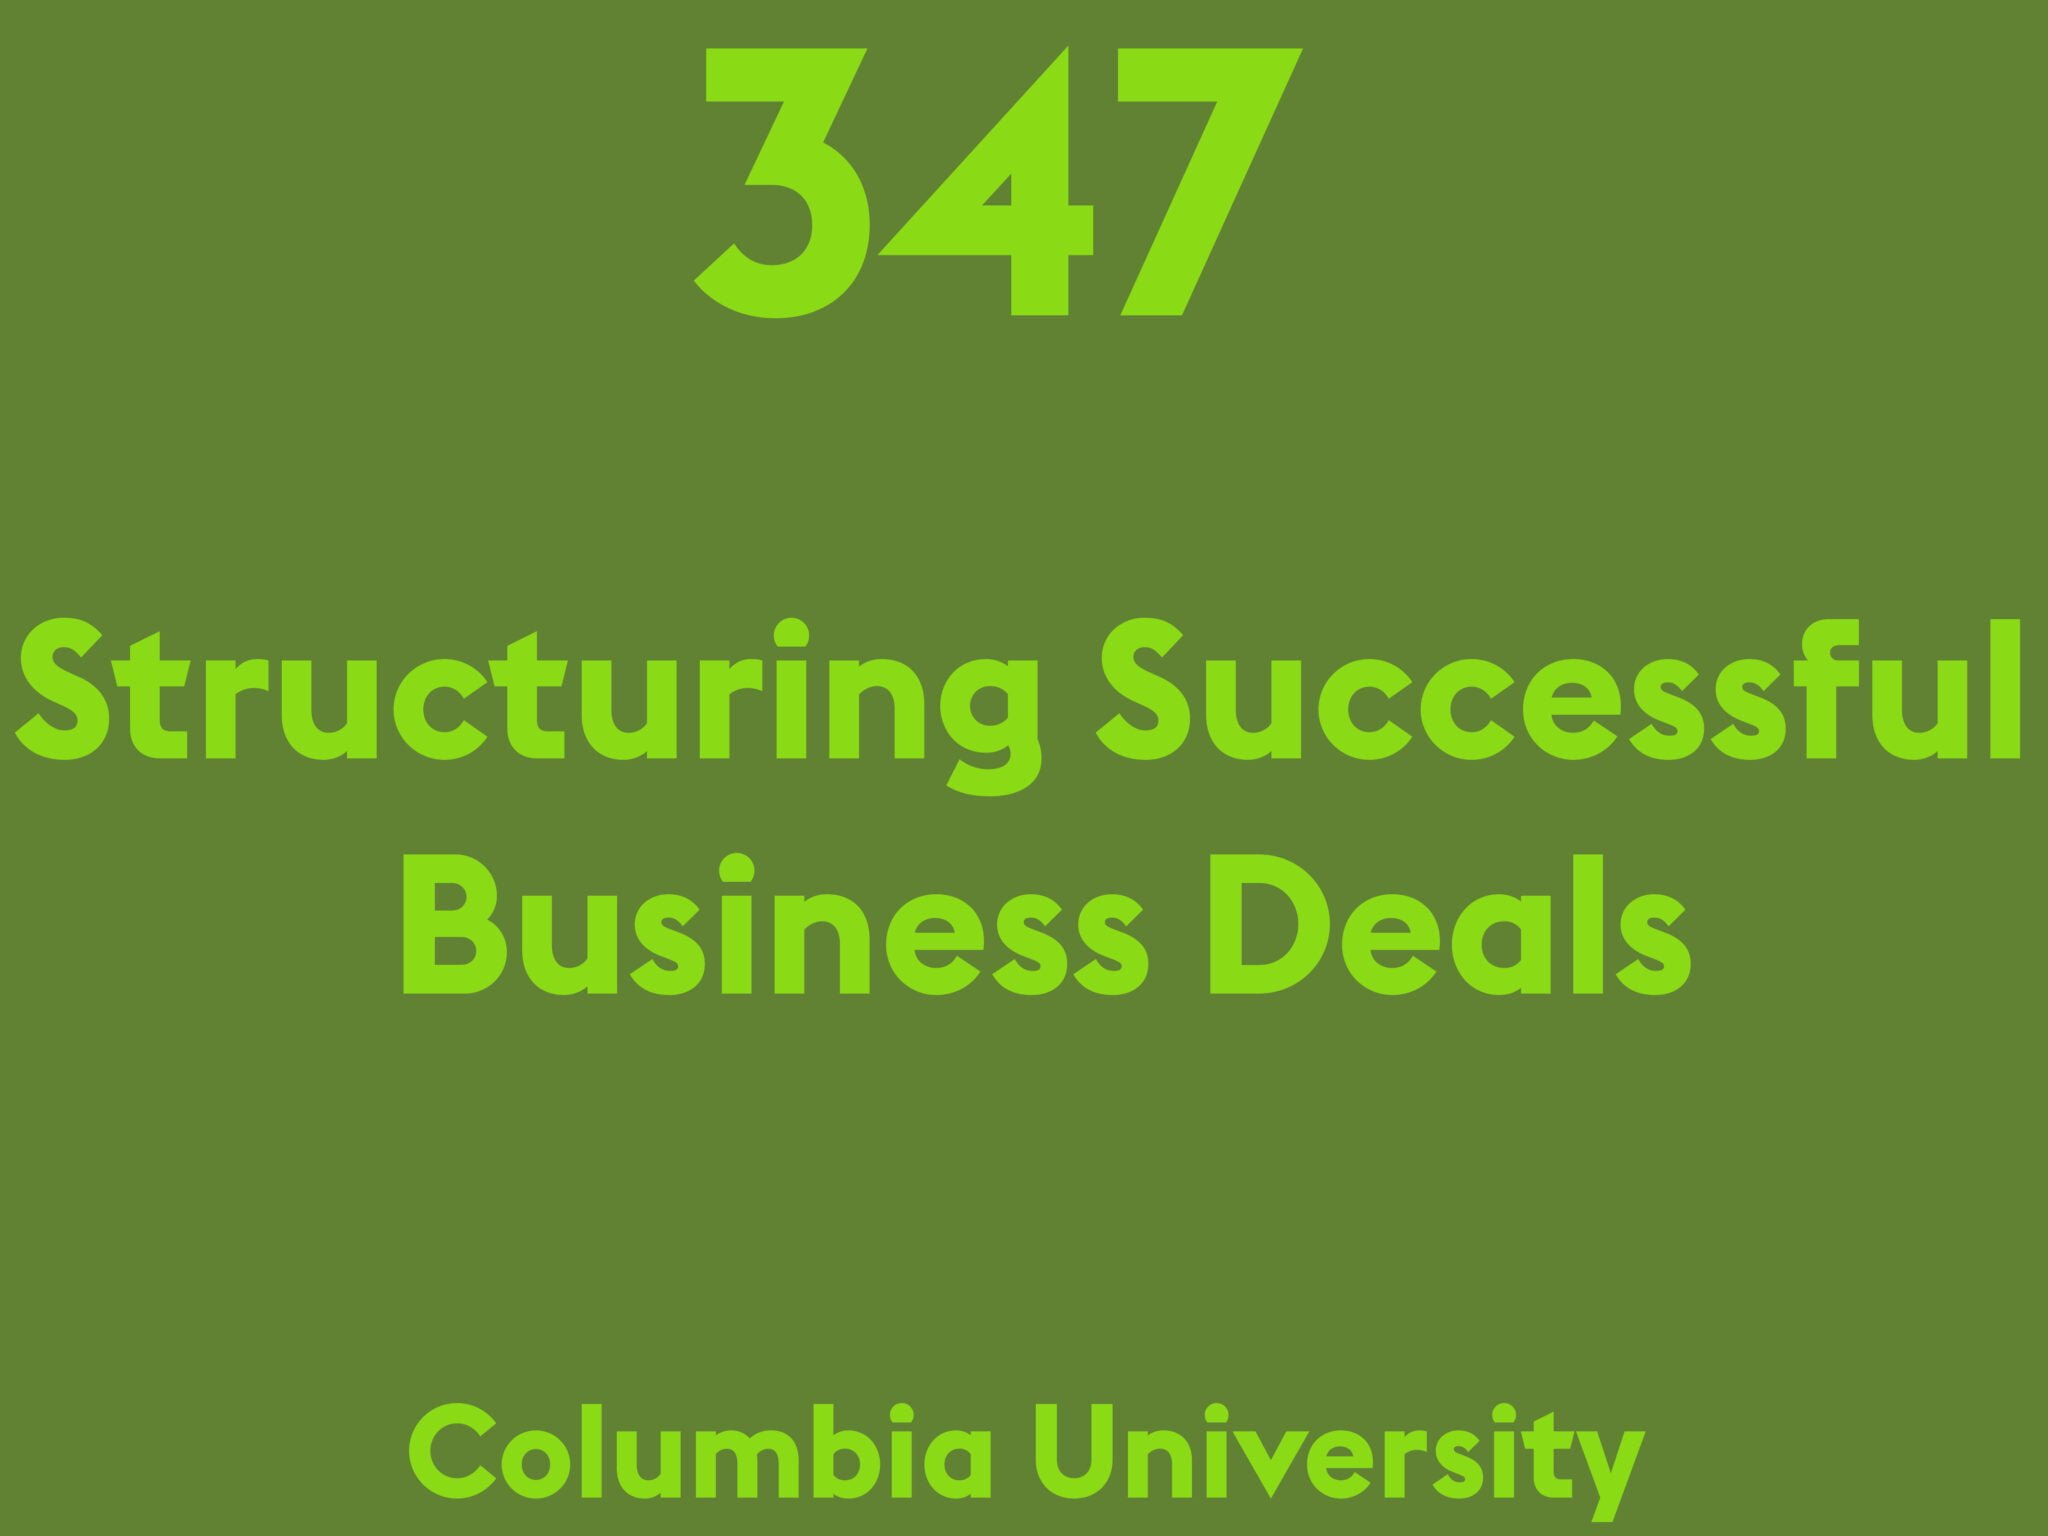 Structuring Successful Business Deals